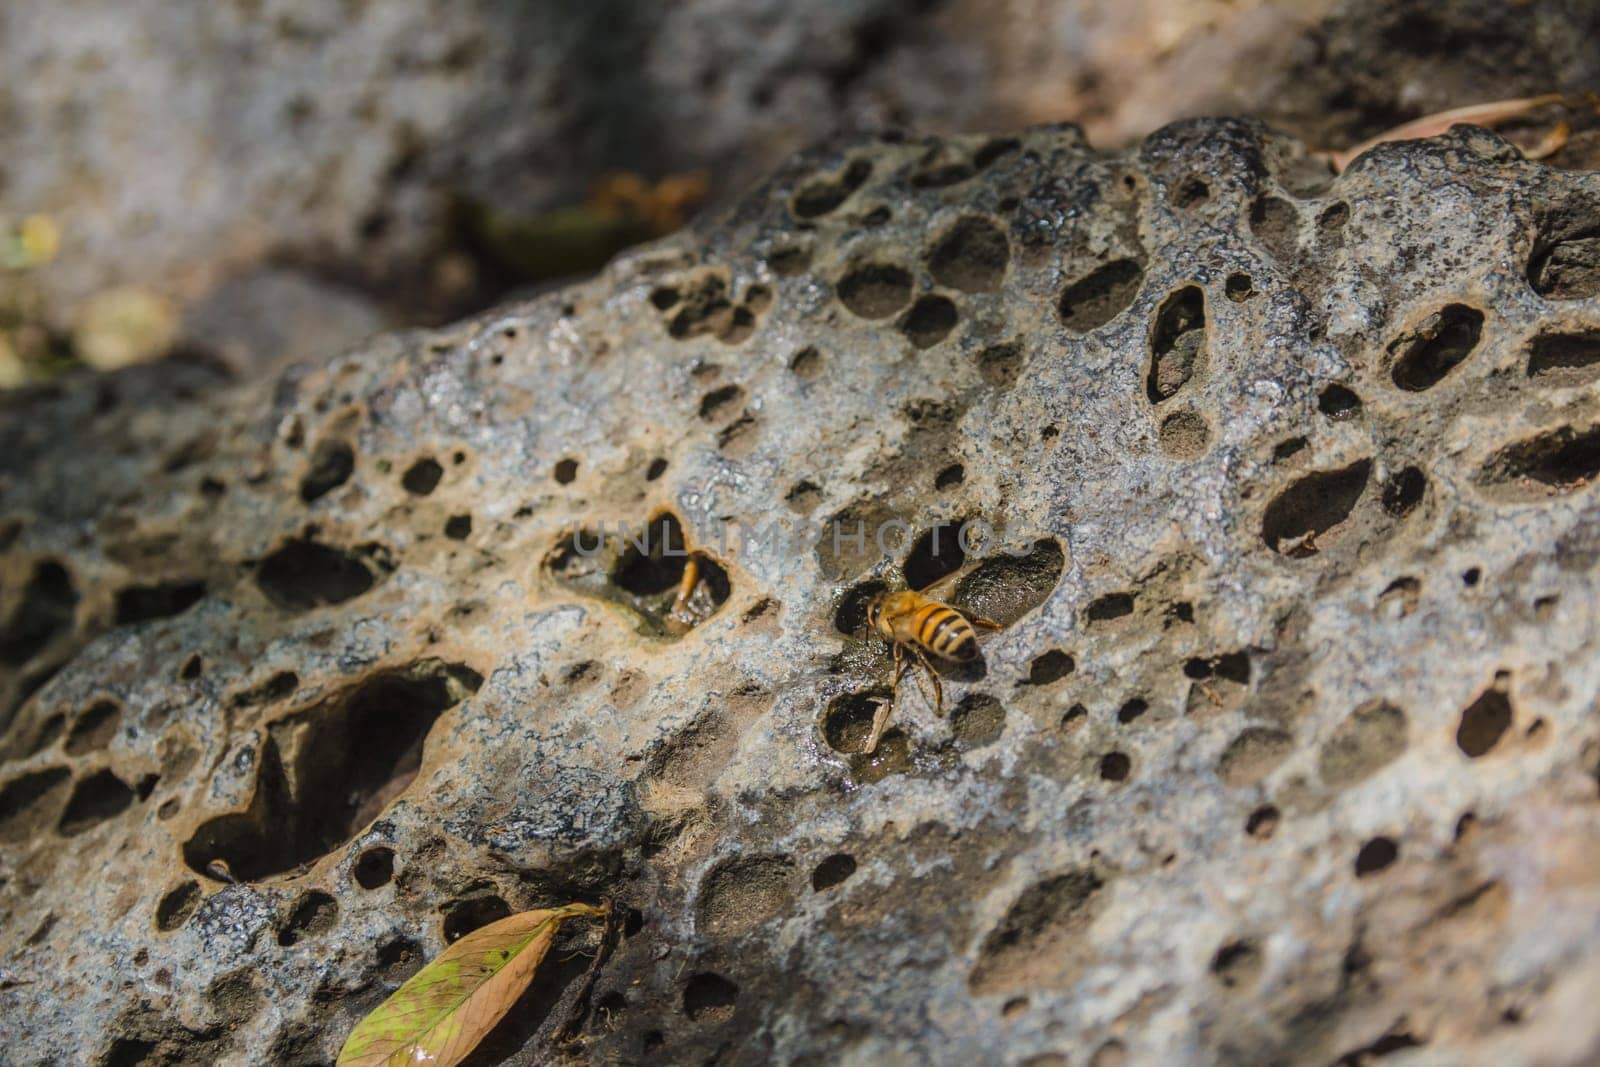 Bee drinking water from drops on a perforated rock by wavemovies